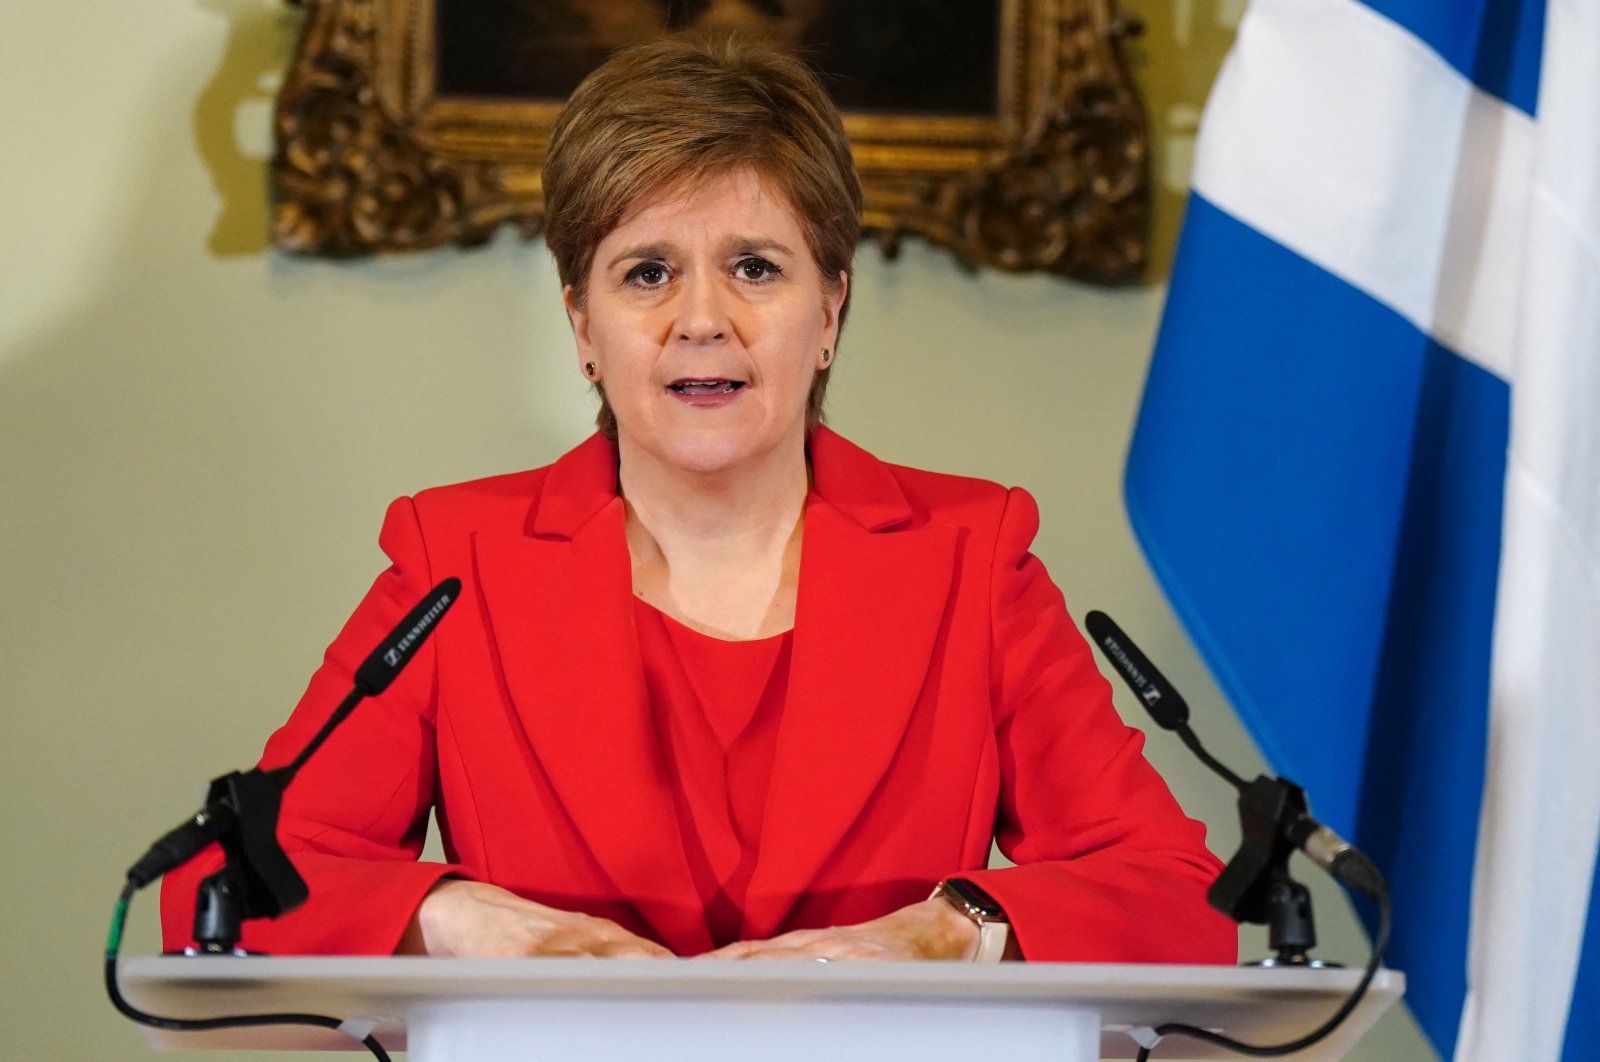 Scotland&#039;s First Minister, and leader of the Scottish National Party (SNP), Nicola Sturgeon, speaks during a press conference at Bute House in Edinburgh, Scotland, Feb. 15, 2023. (AFP Photo)